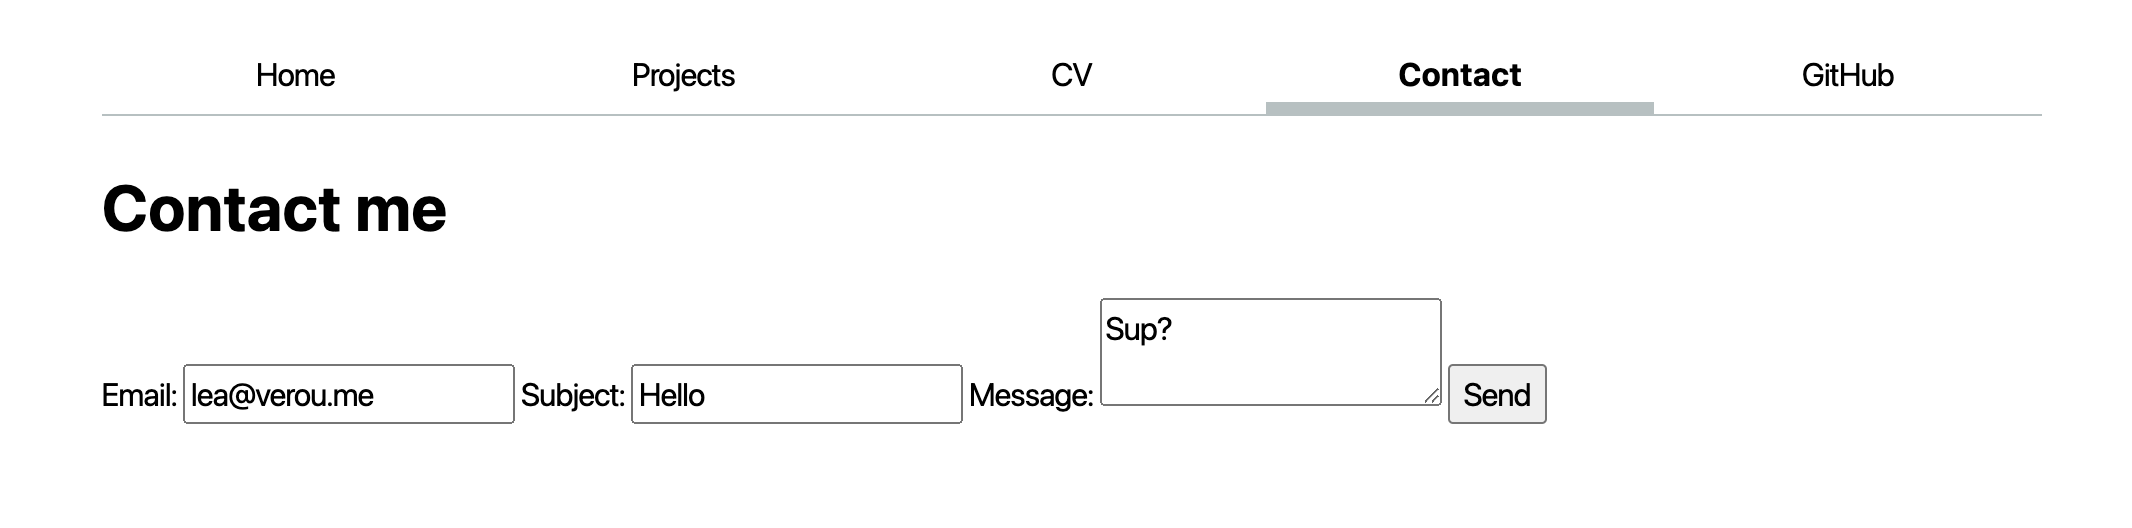 Screenshot of contact form after this step